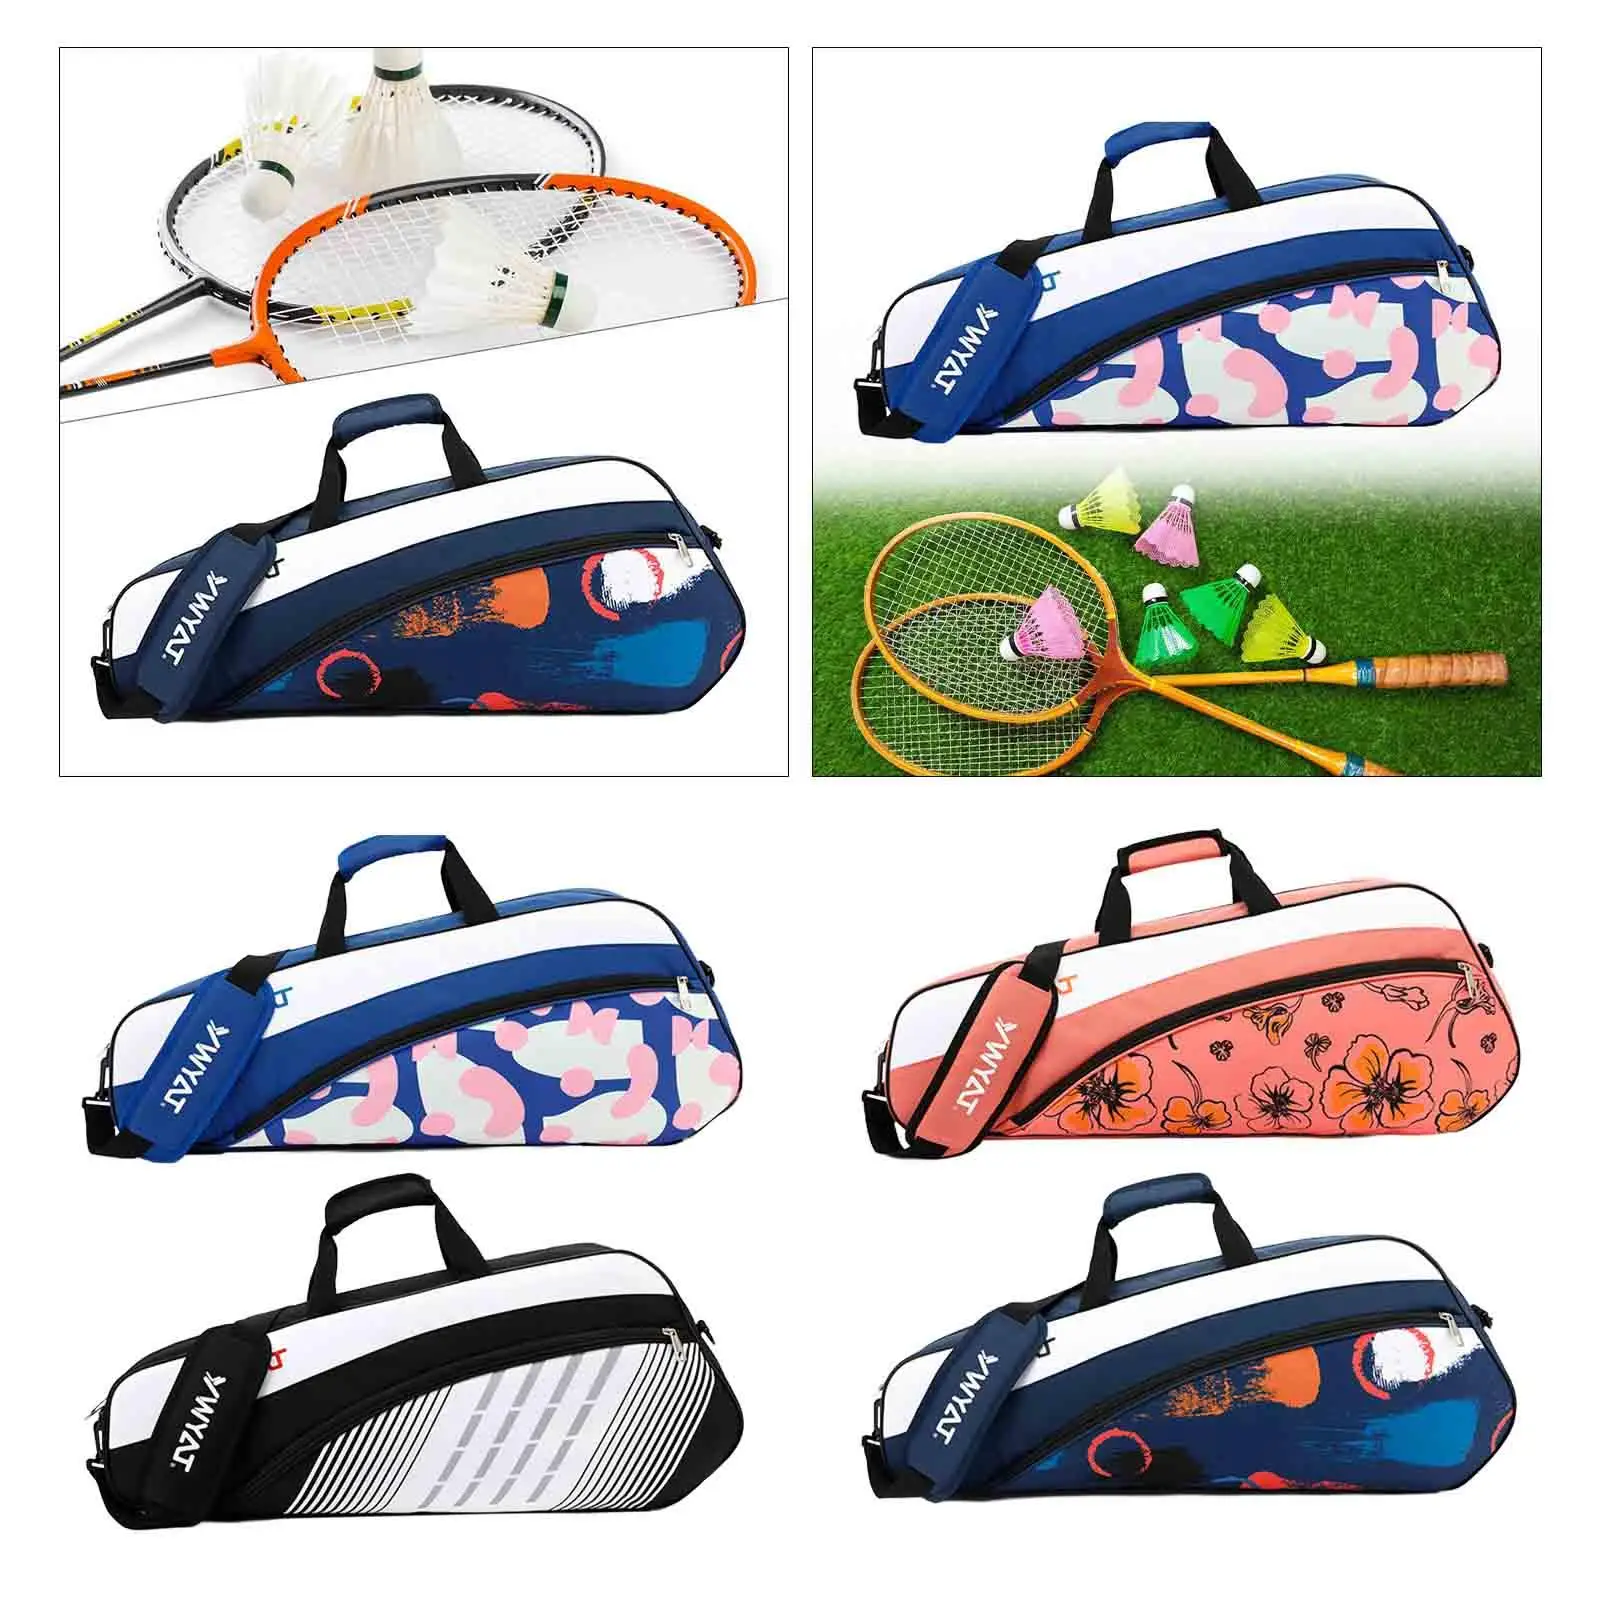 Tennis Racket Bag Tennis Sports Bag for Badminton Enthusiasts Competitions Pickleball Racket Tennis Enthusiasts Tournaments